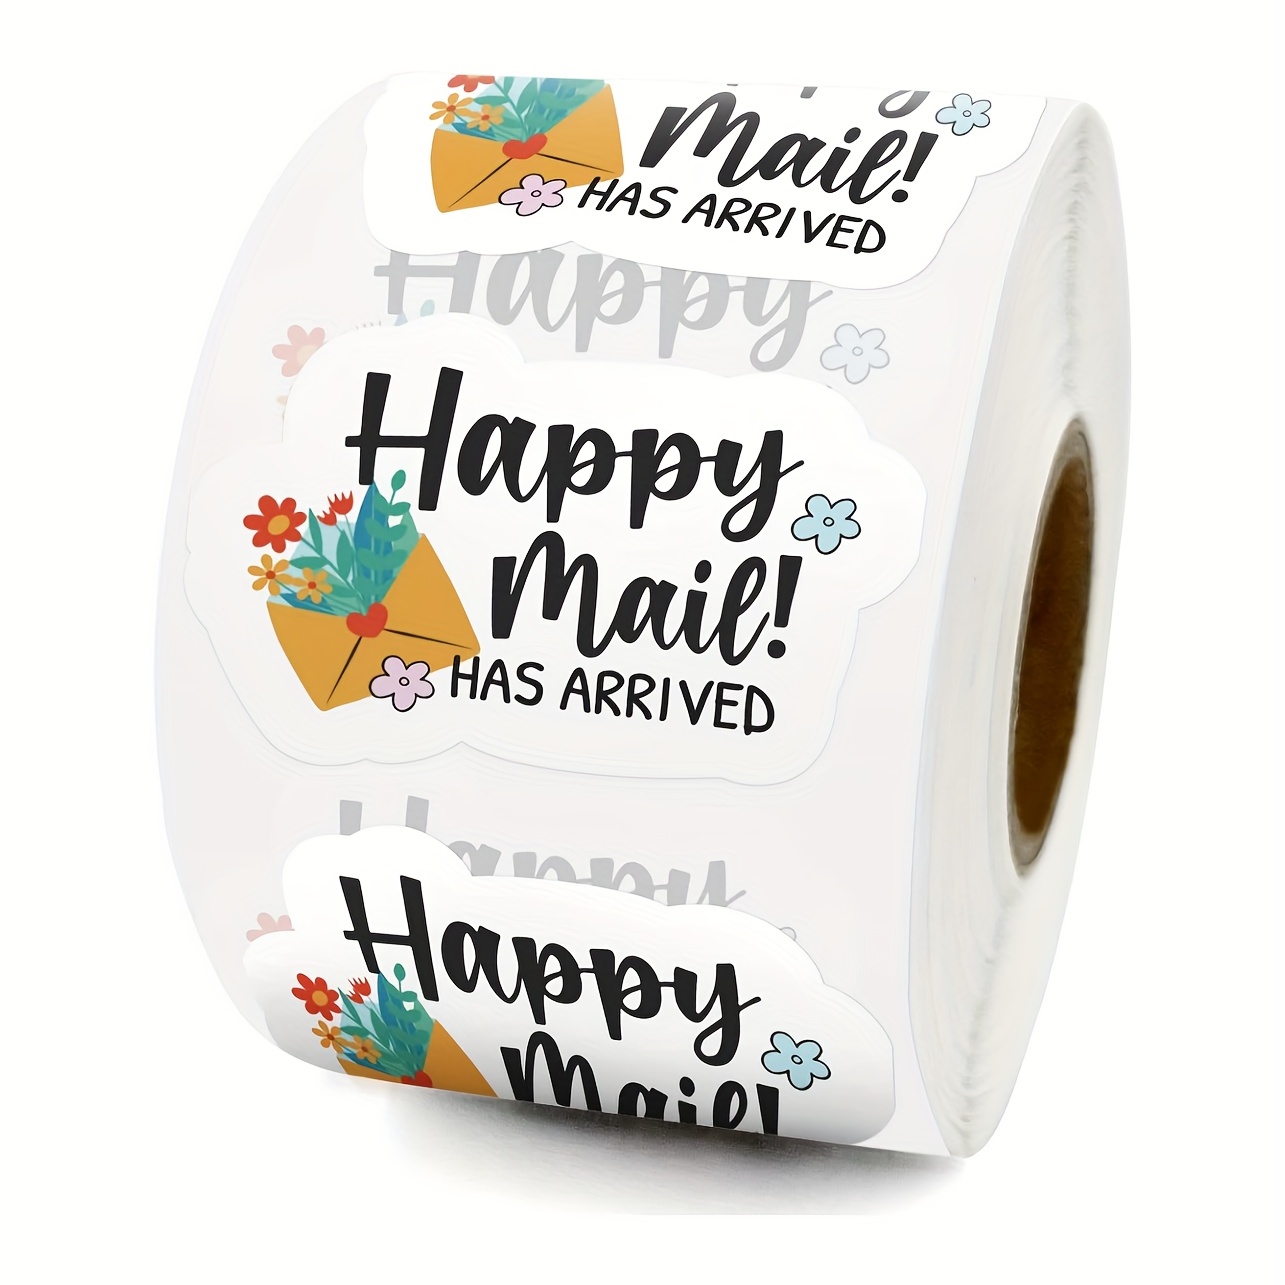 180 PCS Cute Happy Mail Small Shop Thank You Stickers,Small Business Label  sitcker,Envelopes Stickers for Handmade Goods/Bags Business Packages,Thanks